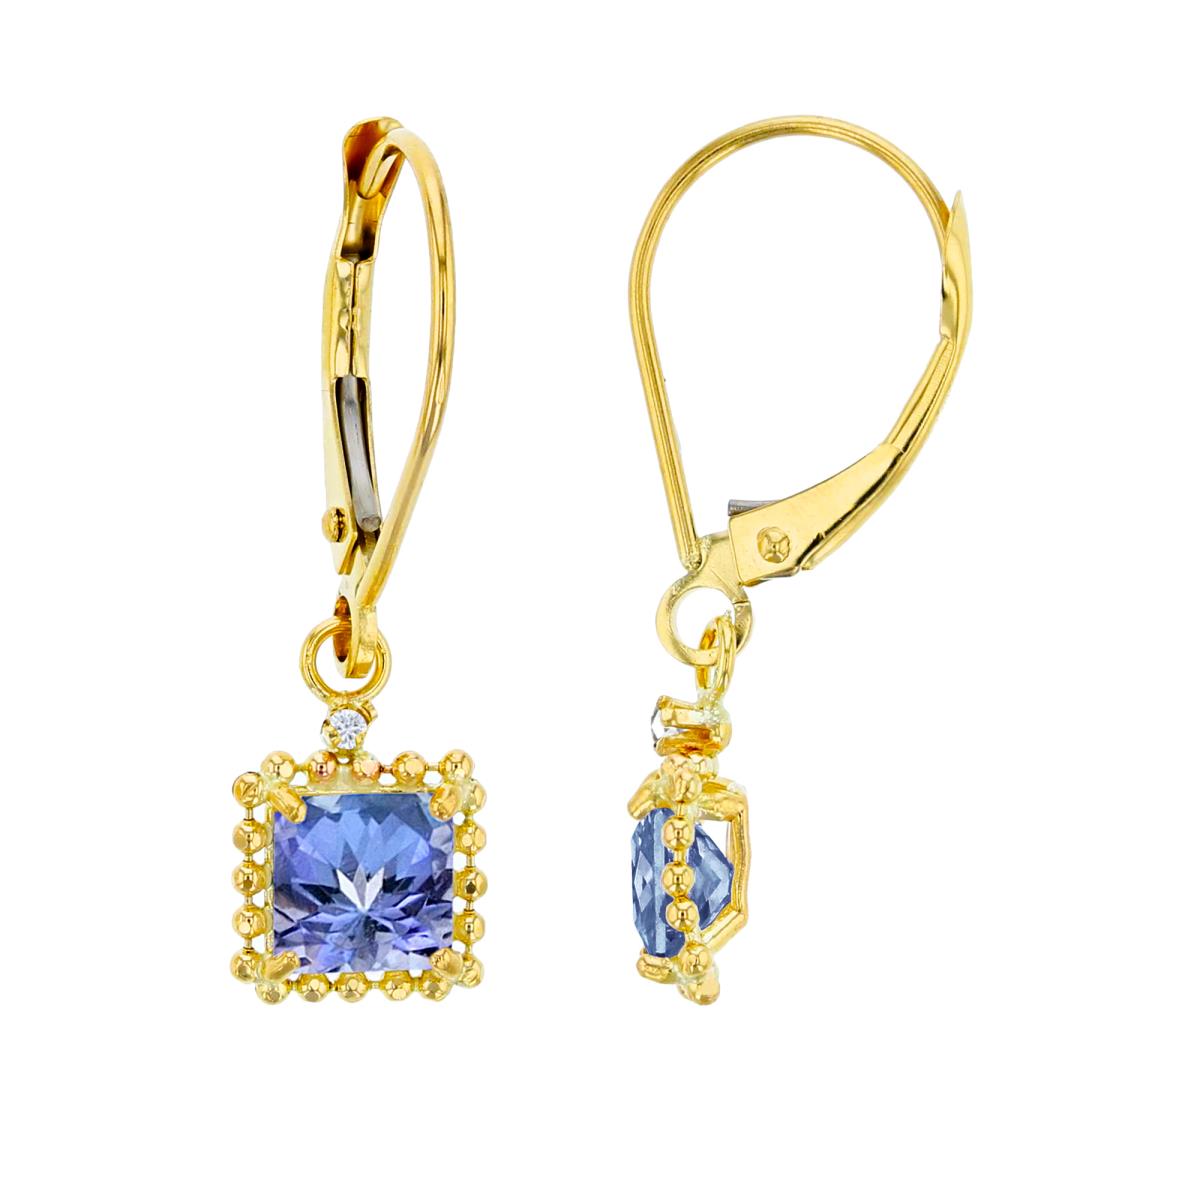 14K Yellow Gold 1.25mm Rd Created White Sapphire & 5mm Sq Tanzanite Bead Frame Drop Lever-Back Earring